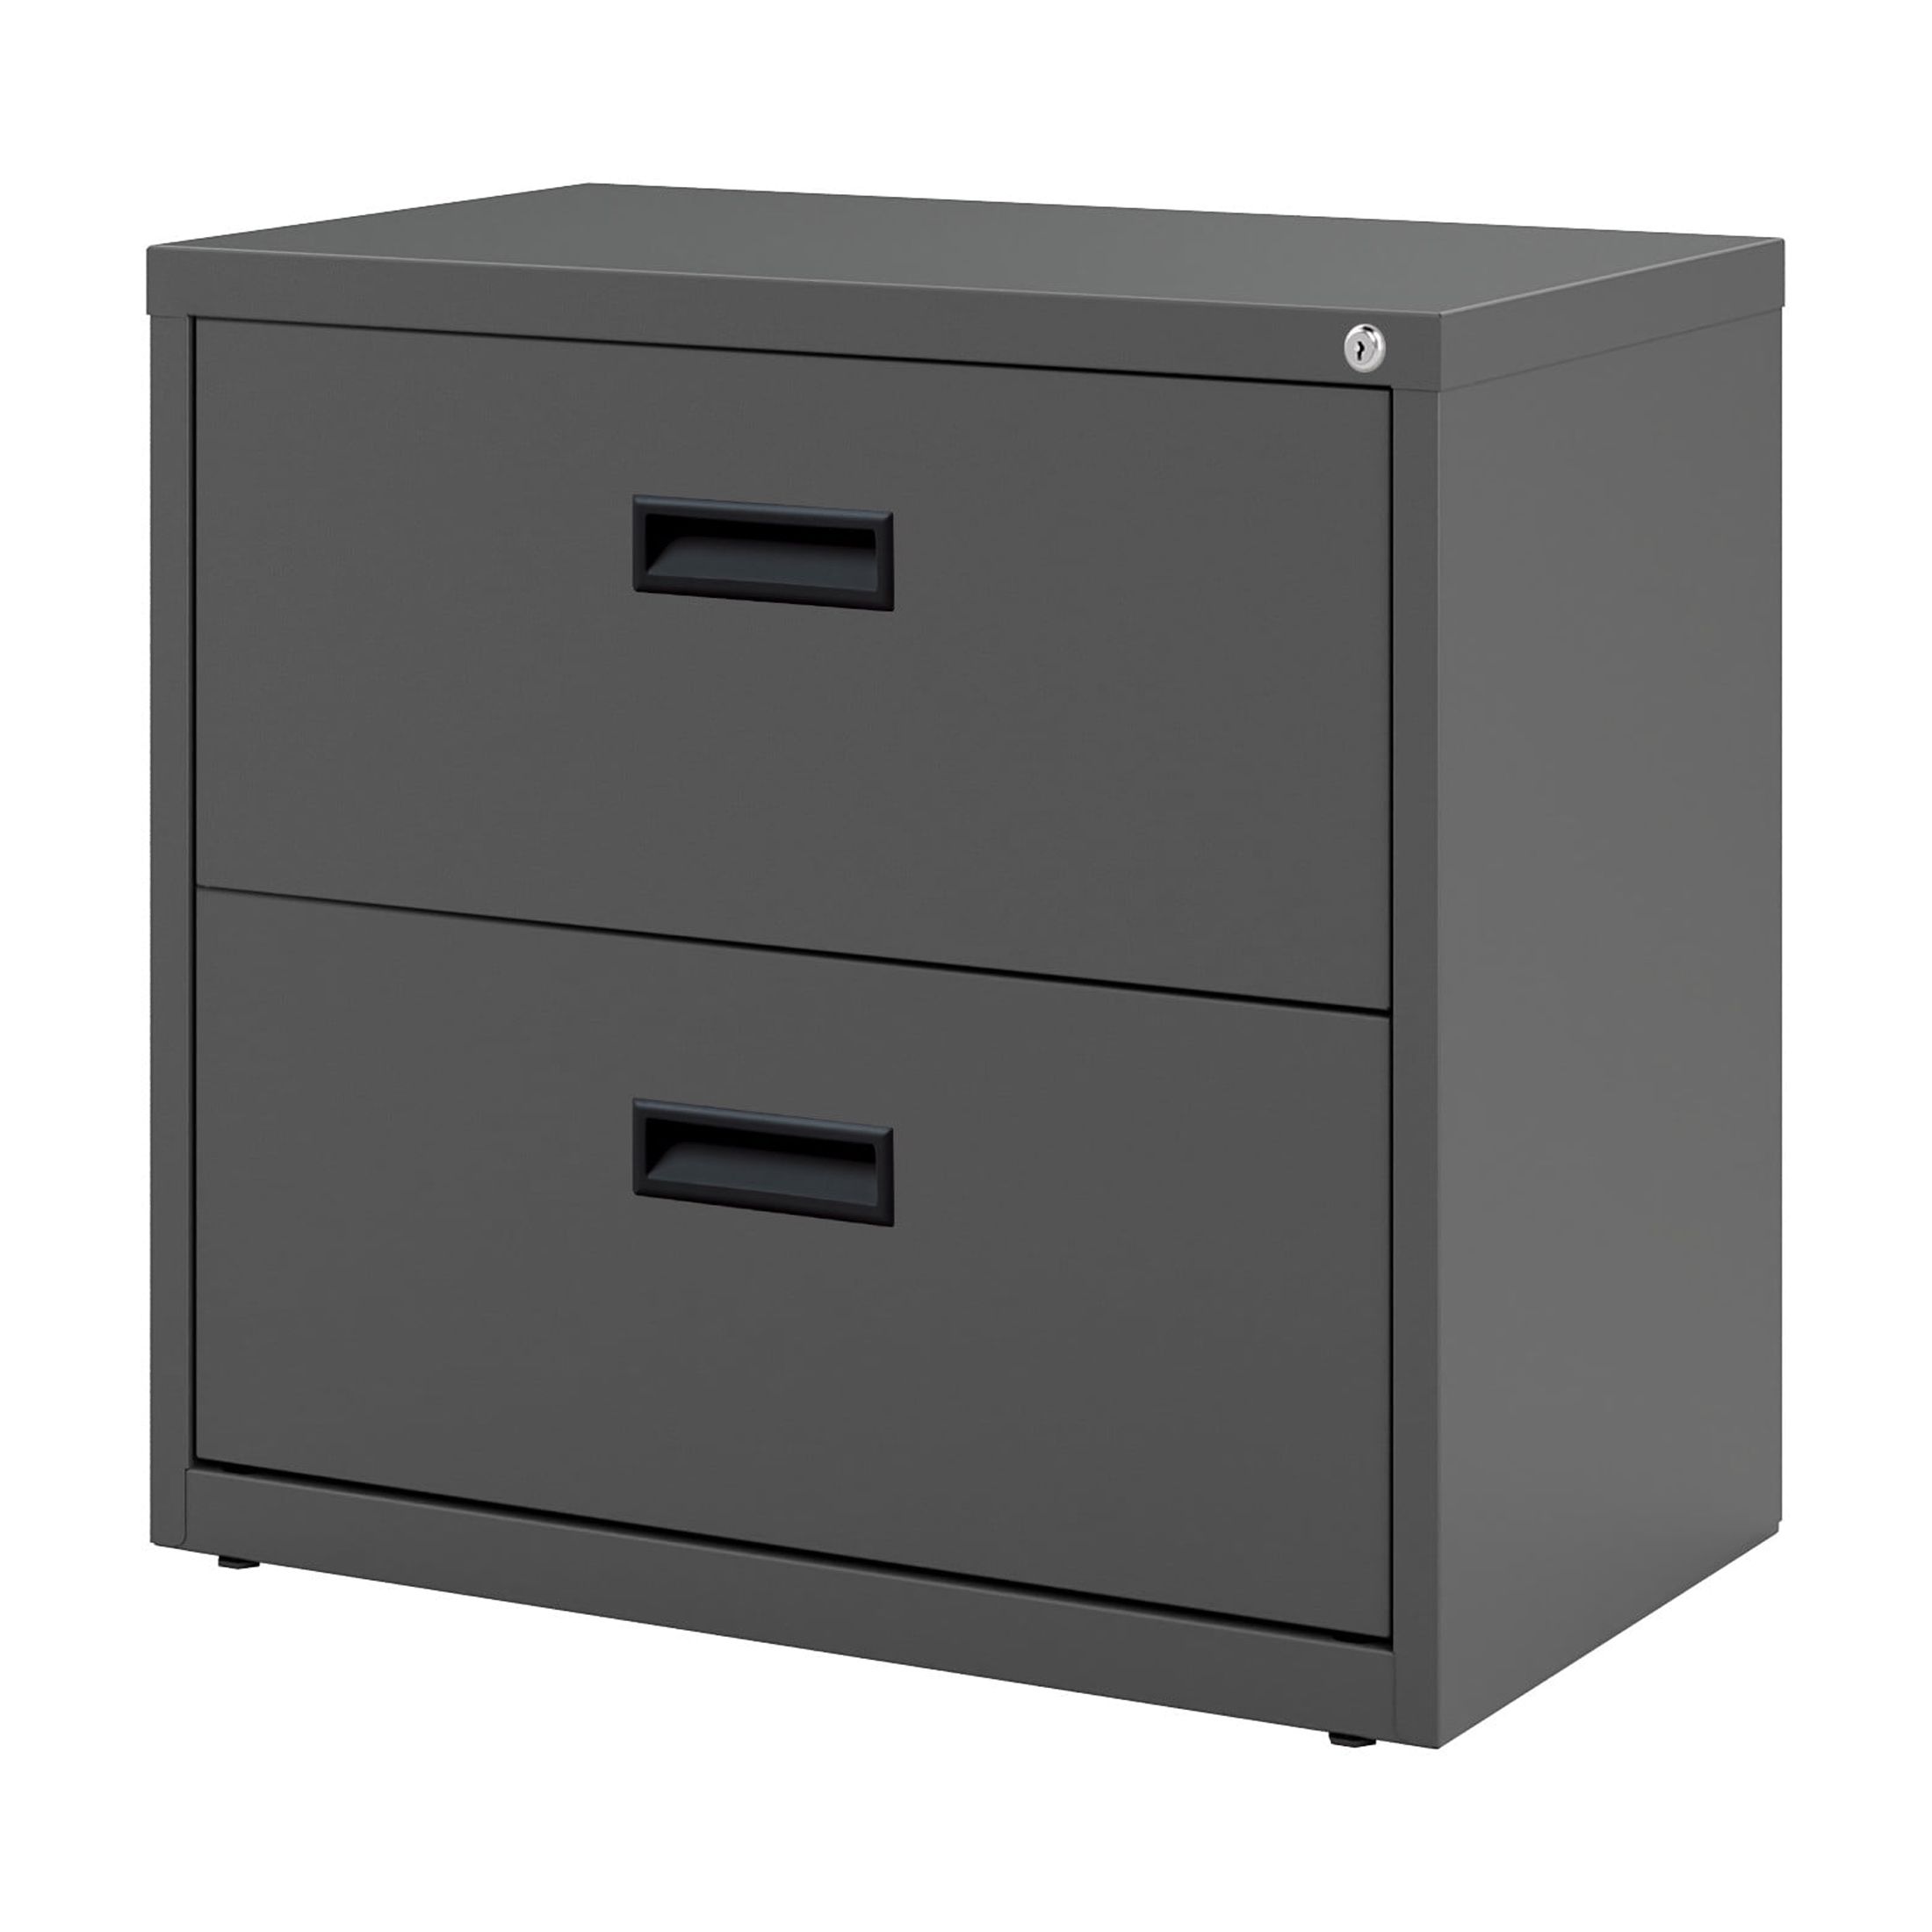 Hirsh 30 inch Wide 2 Drawer Lateral File Cabinet for Home or Office, Charcoal - image 3 of 5